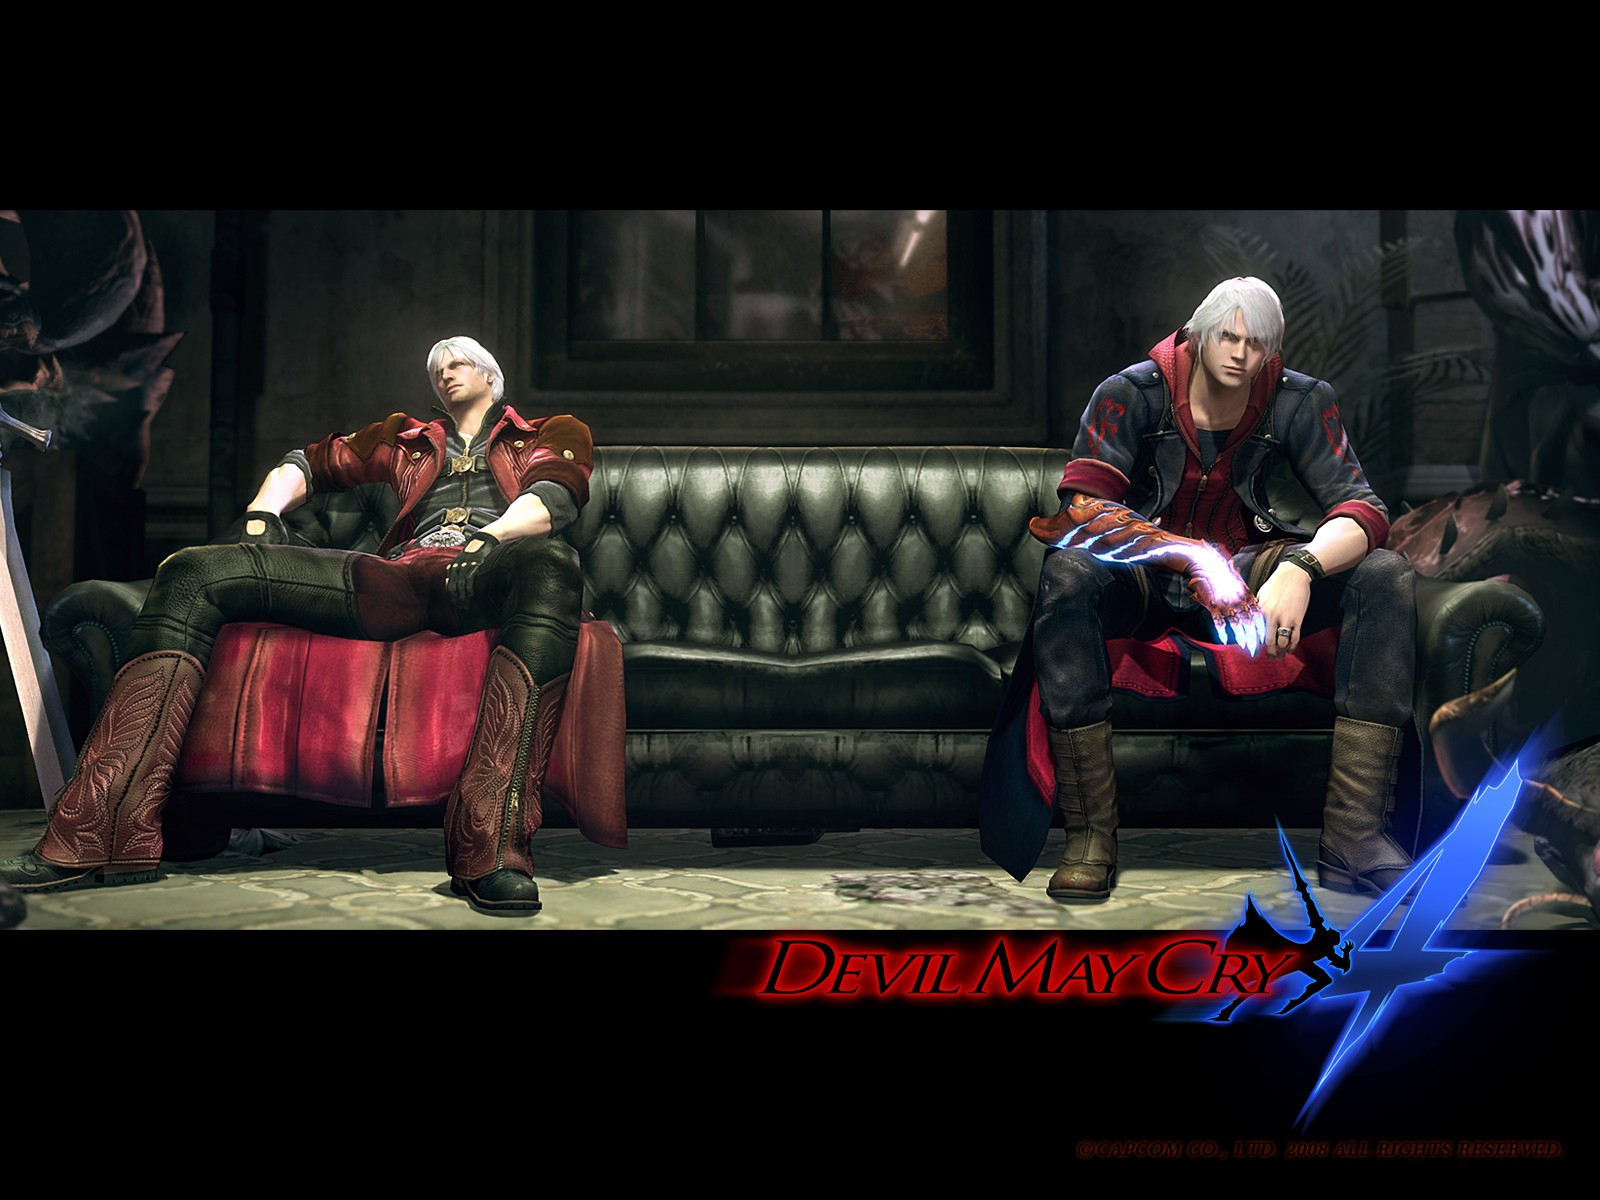  TO7cy8woCo8s1600devil may cry 4 wallpaper wp20080222 3jpg